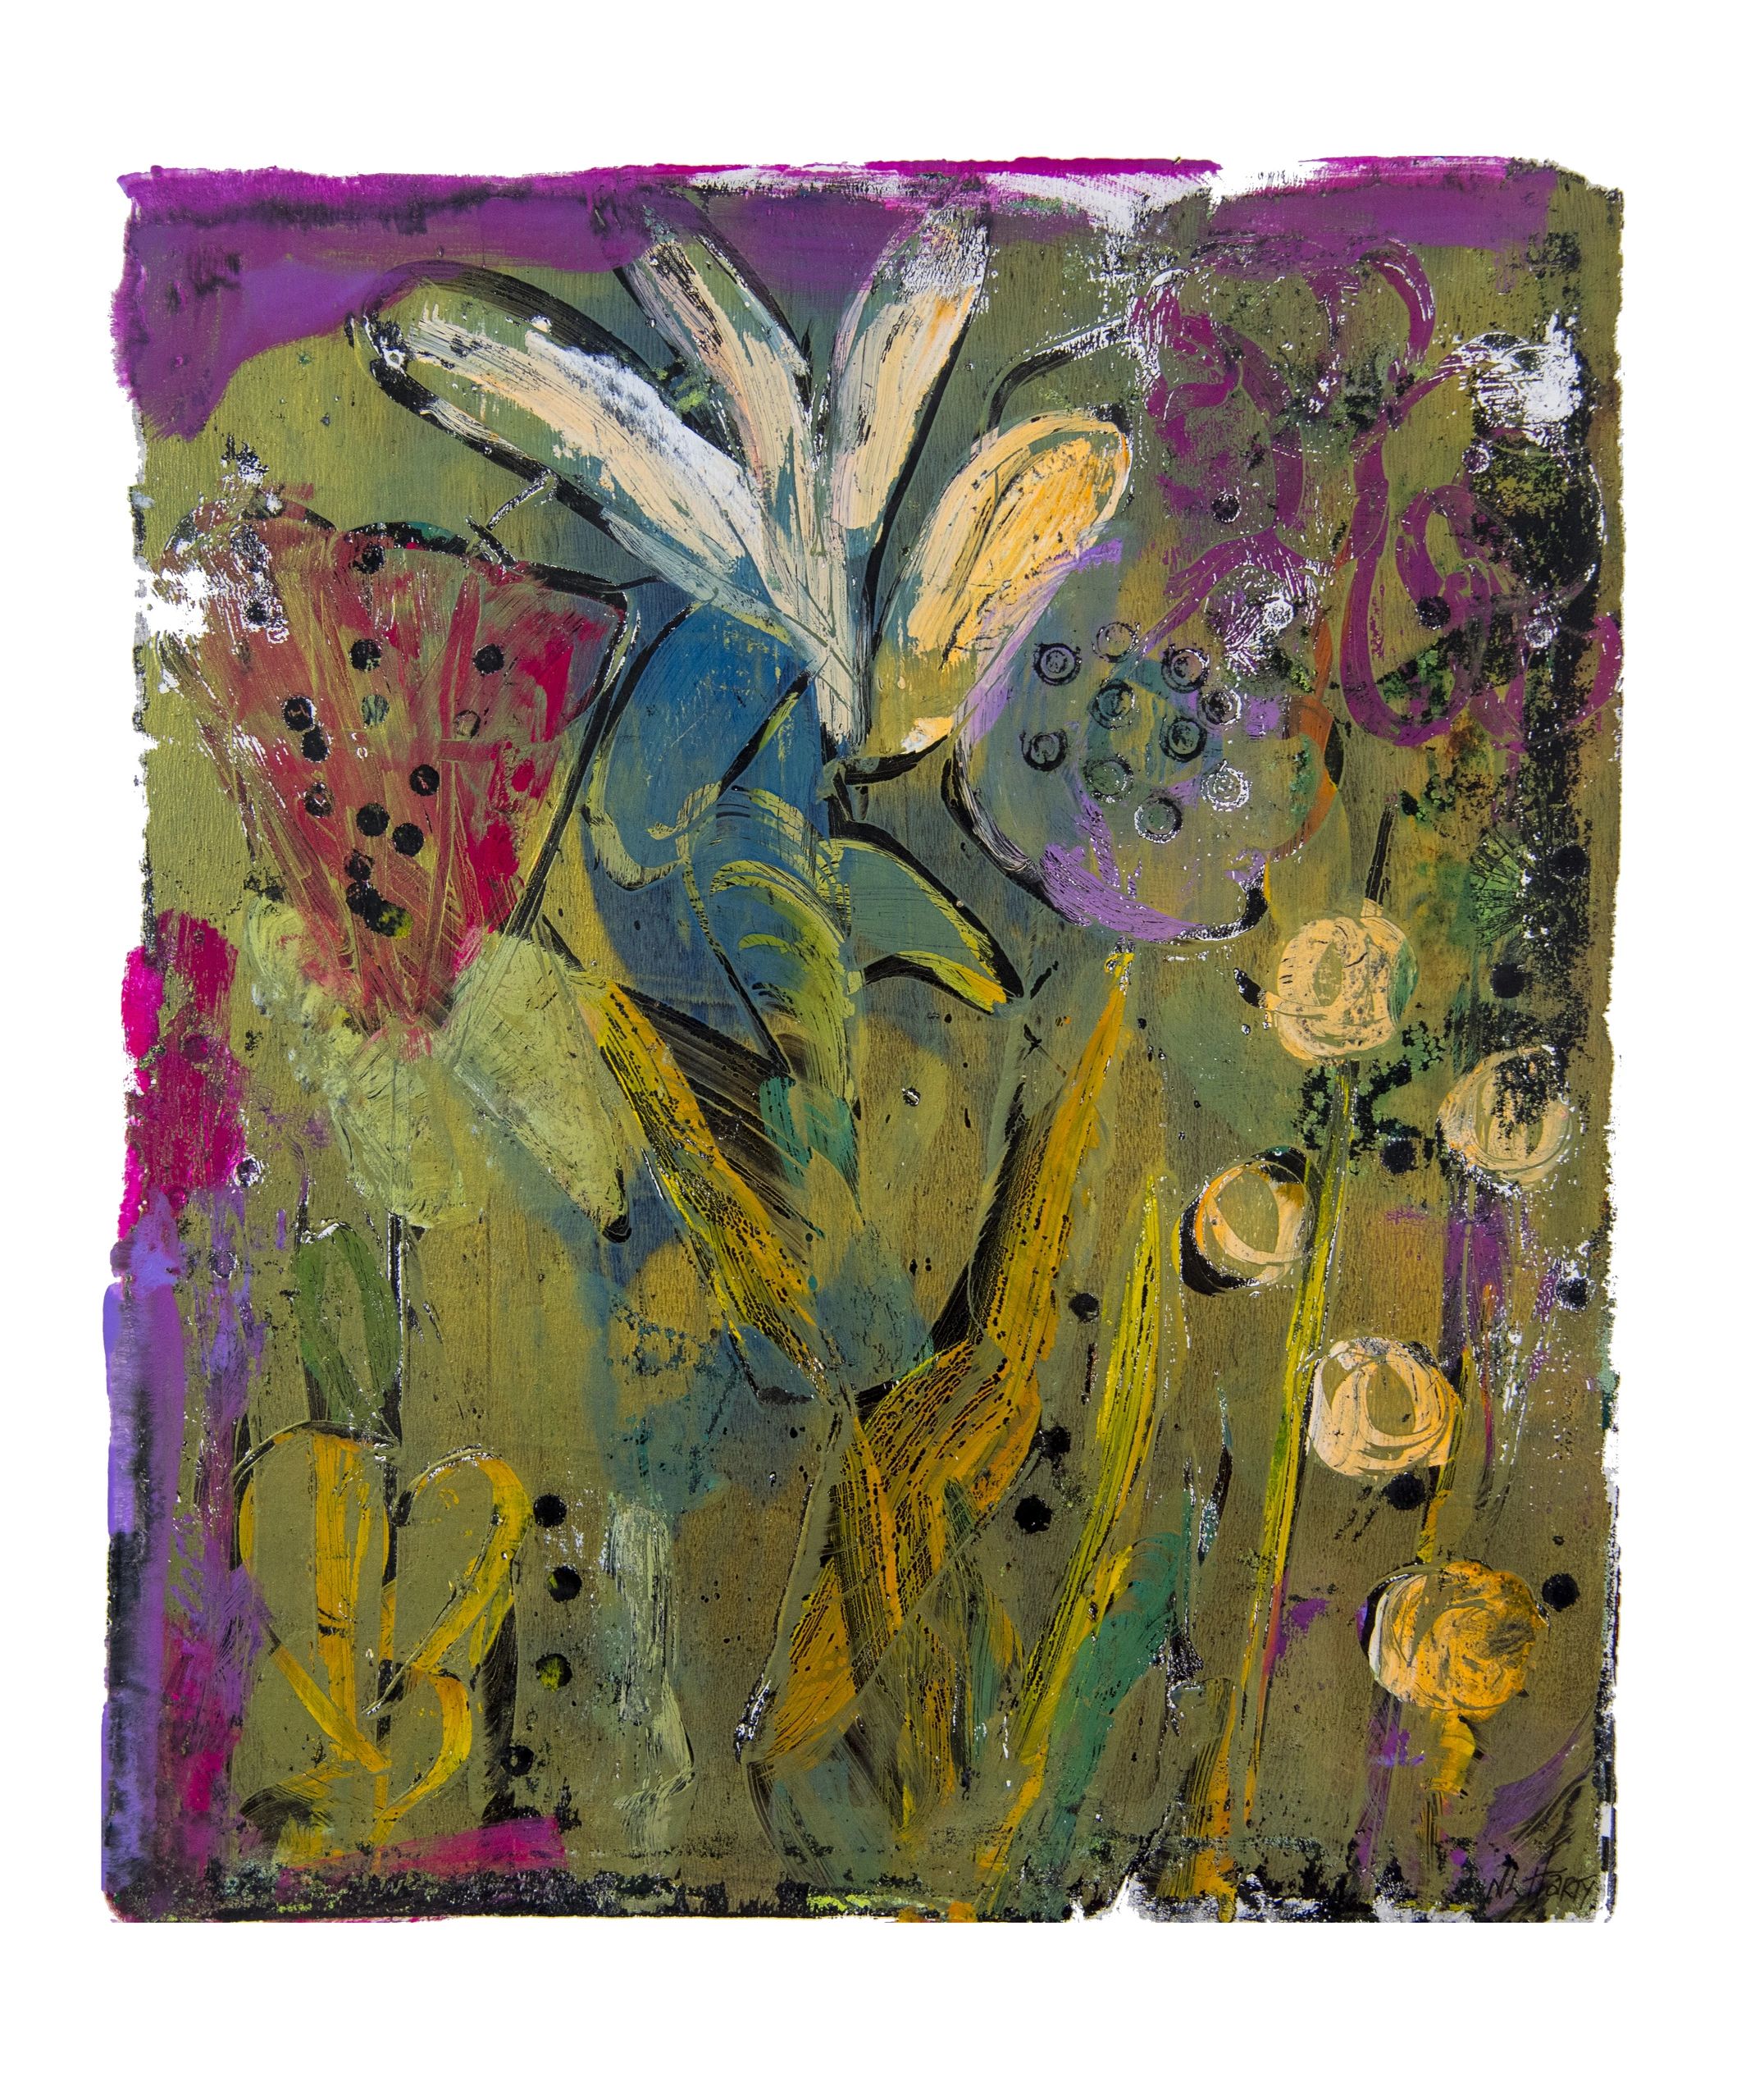 Abstract floral monotype with magenta, purple, yellow and gold with some black accents